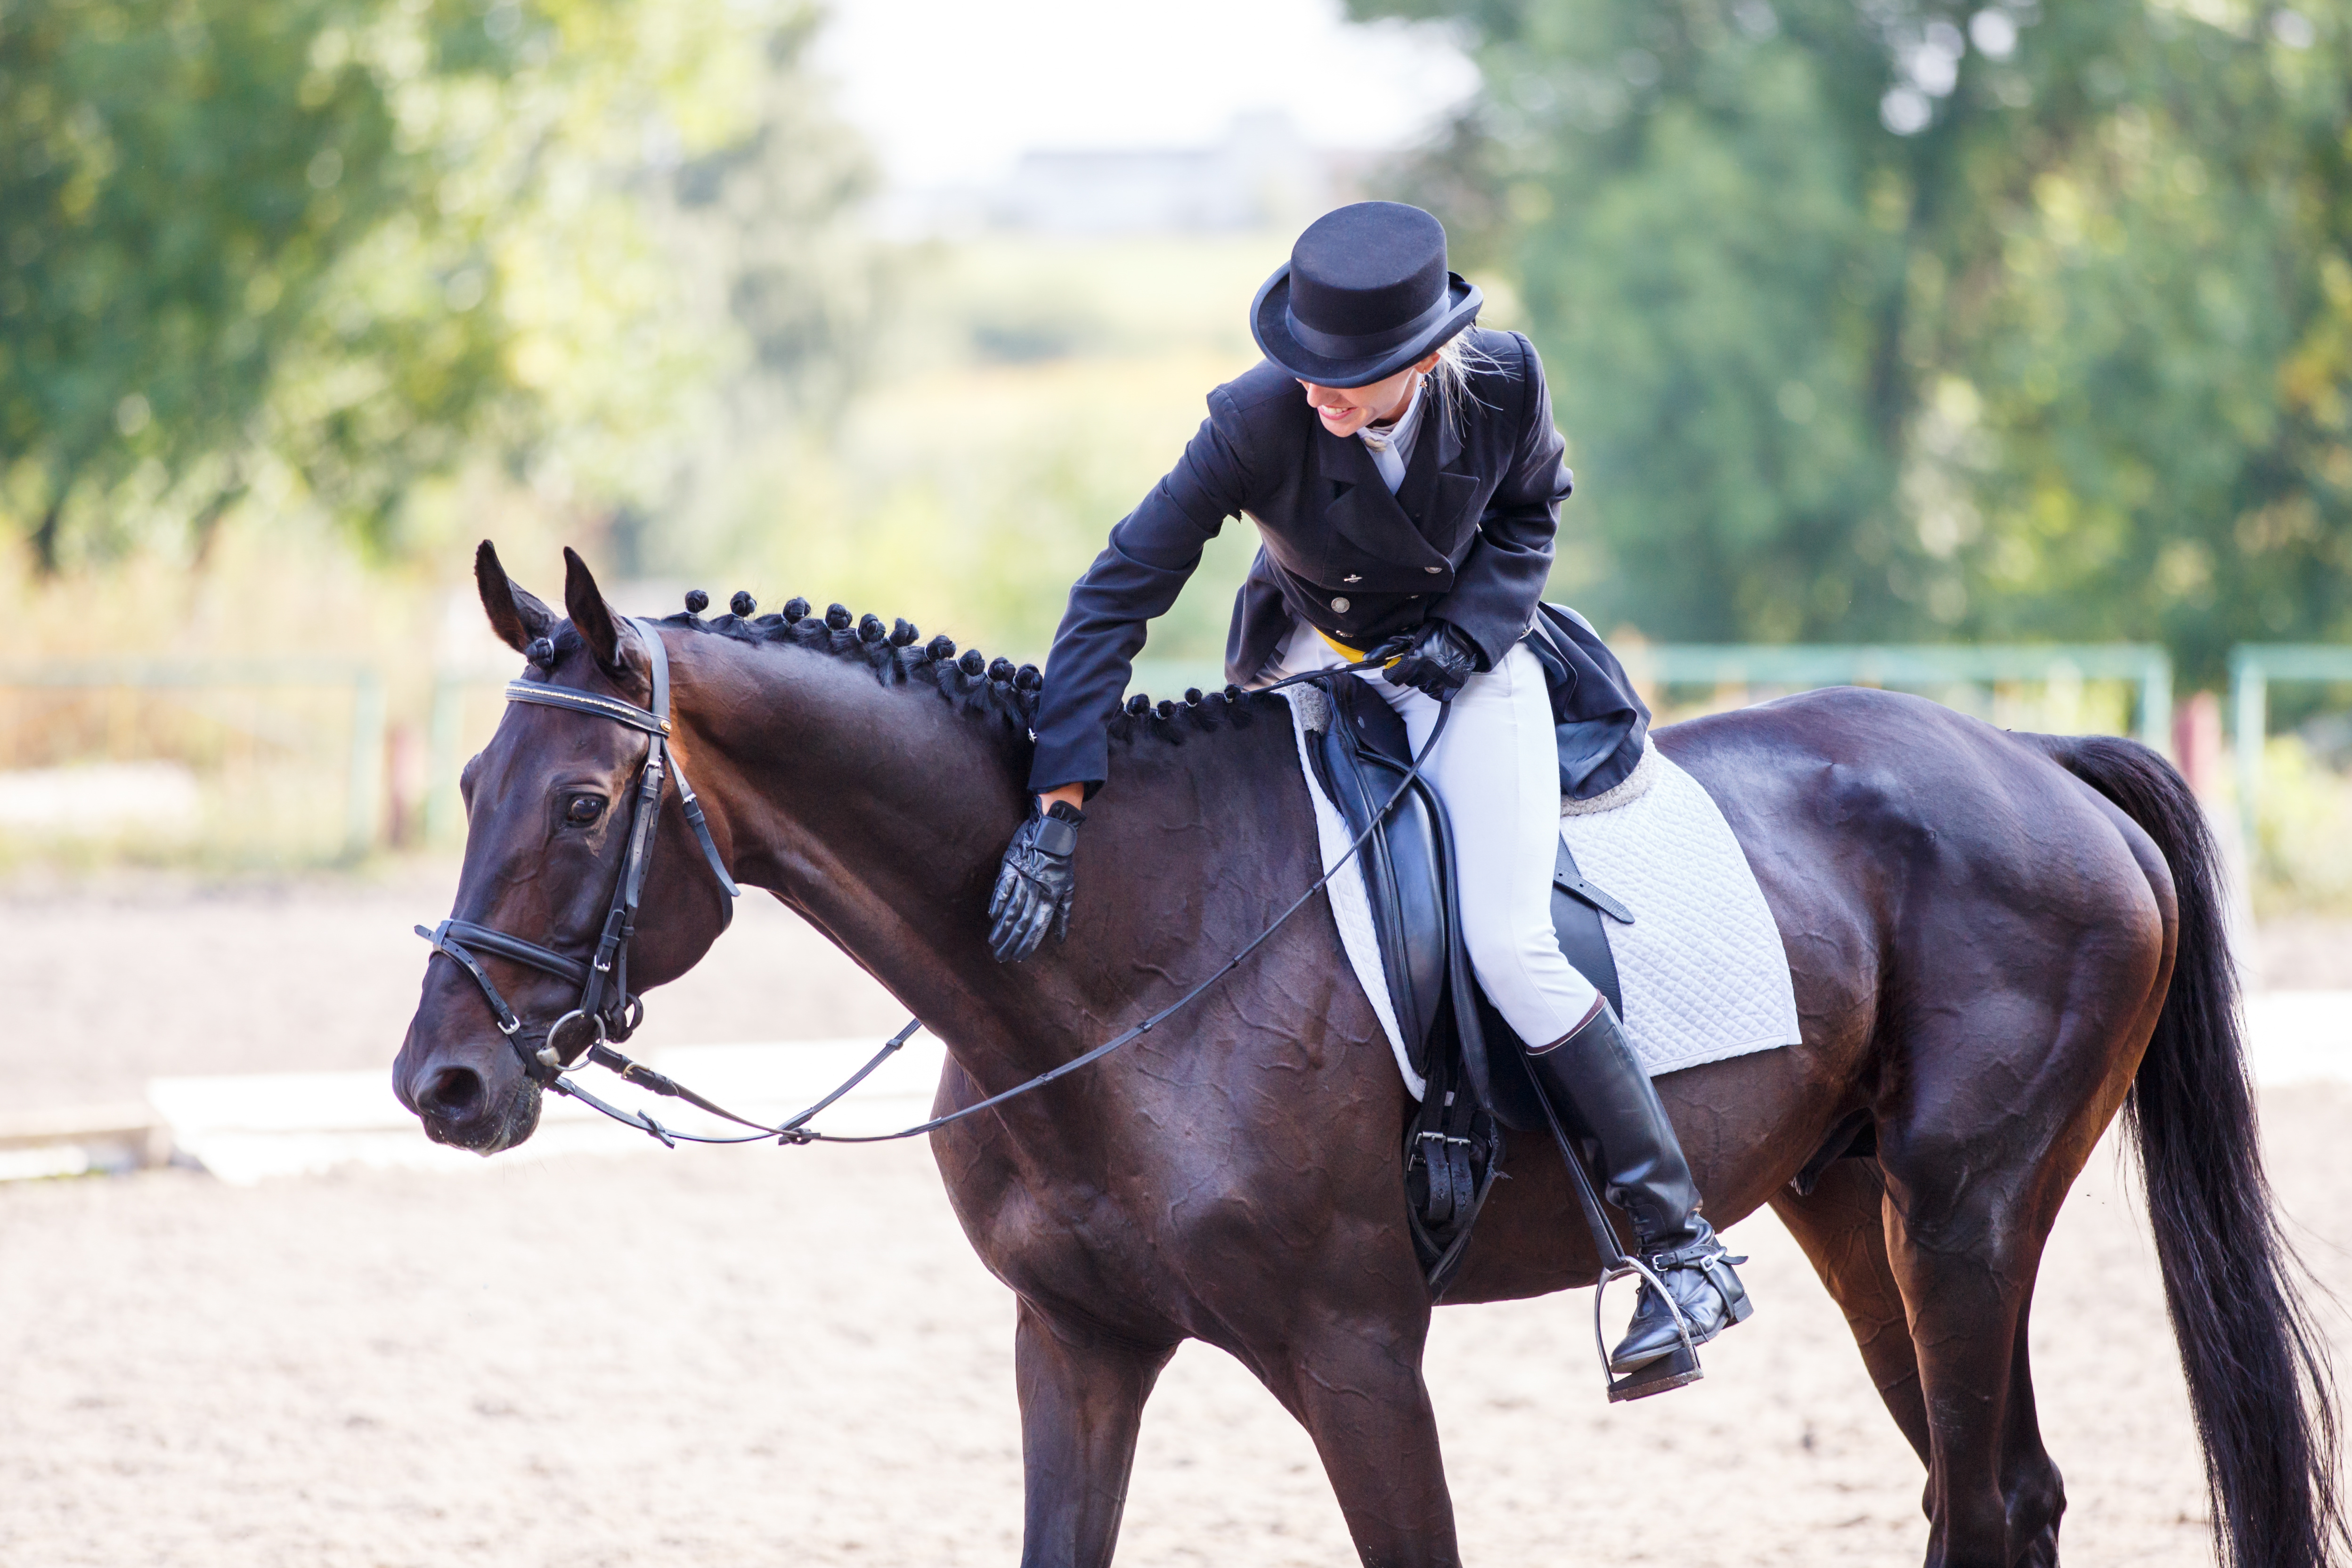 A dressage rider patting her horse on the neck.